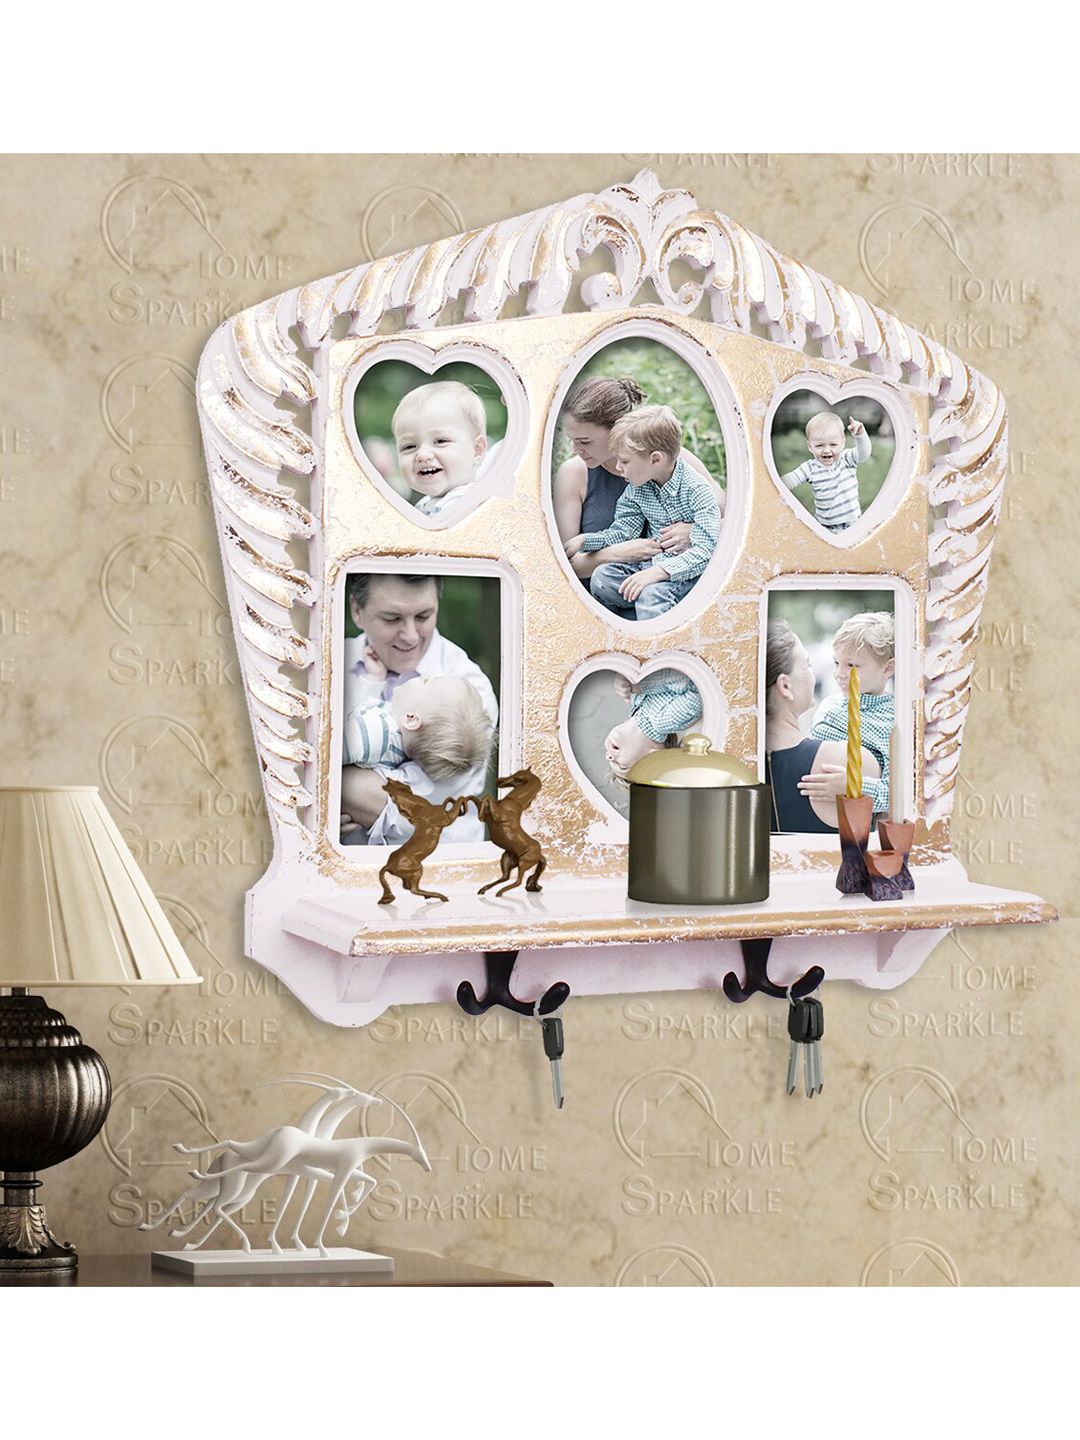 Home Sparkle Wood Wall Shelf with Key Holders Price in India